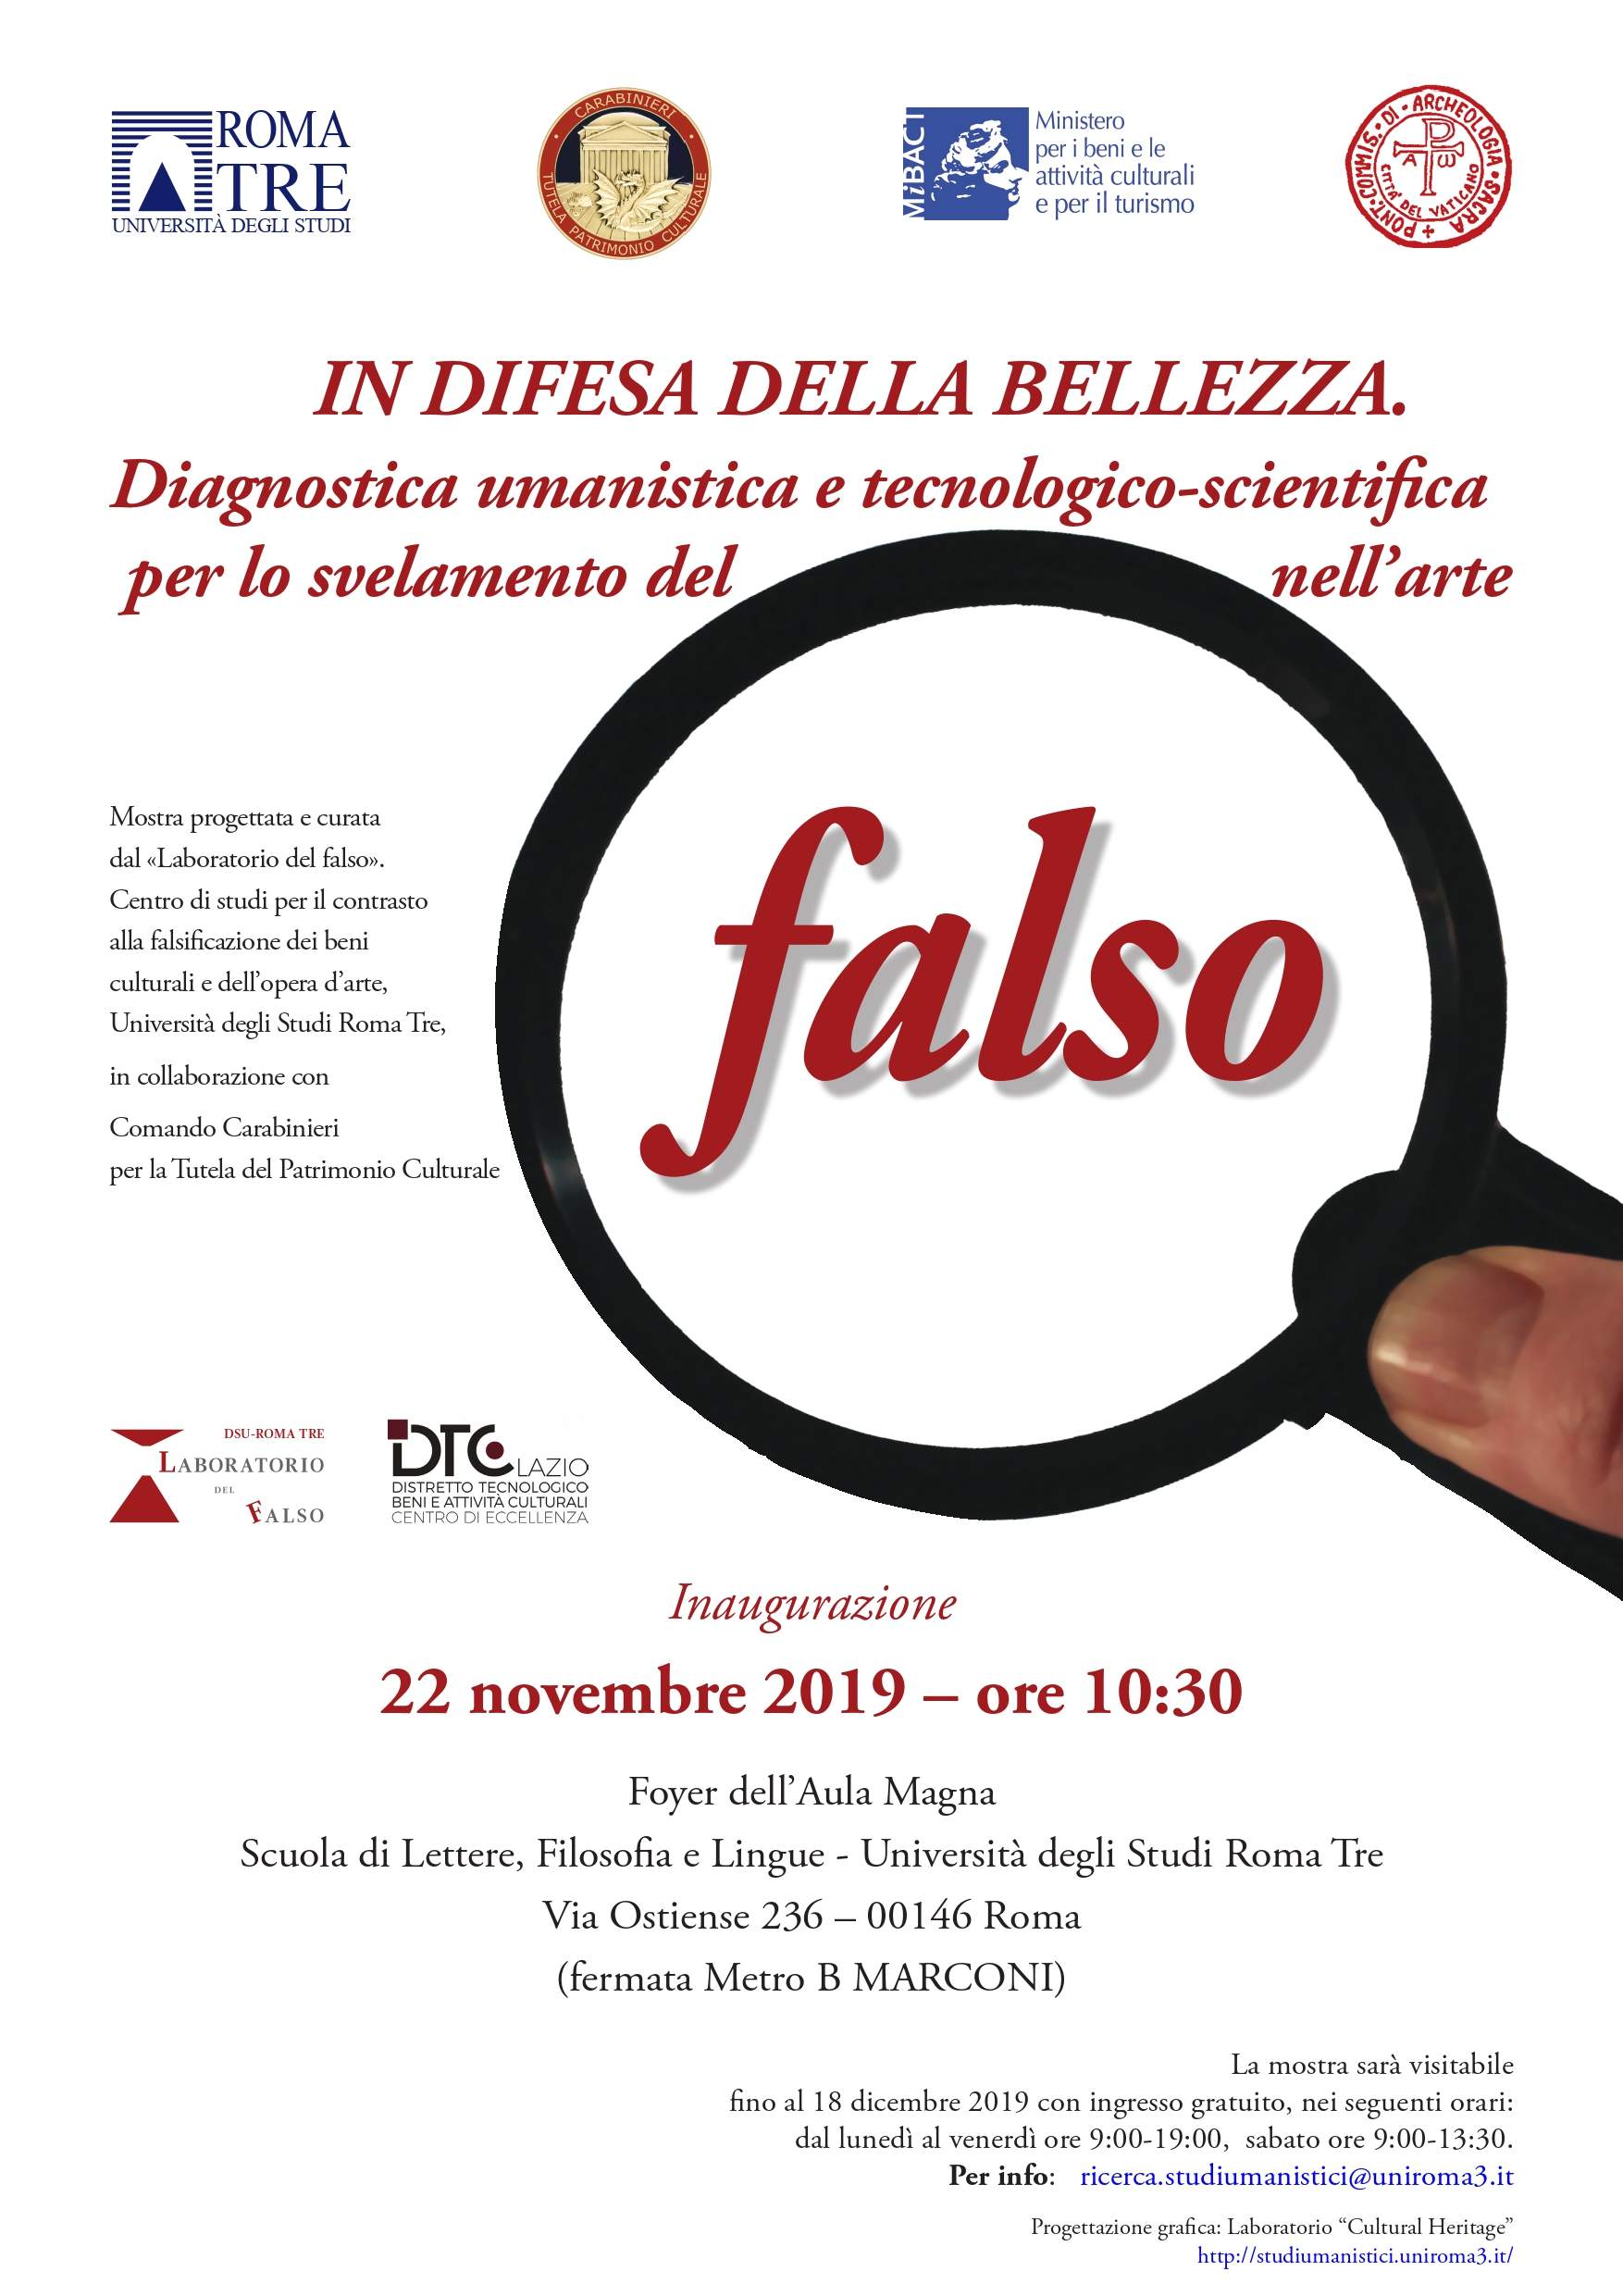 How do you reveal a fake in art? An exhibition by the Carabinieri's Cultural Heritage Protection Unit tells the tale.